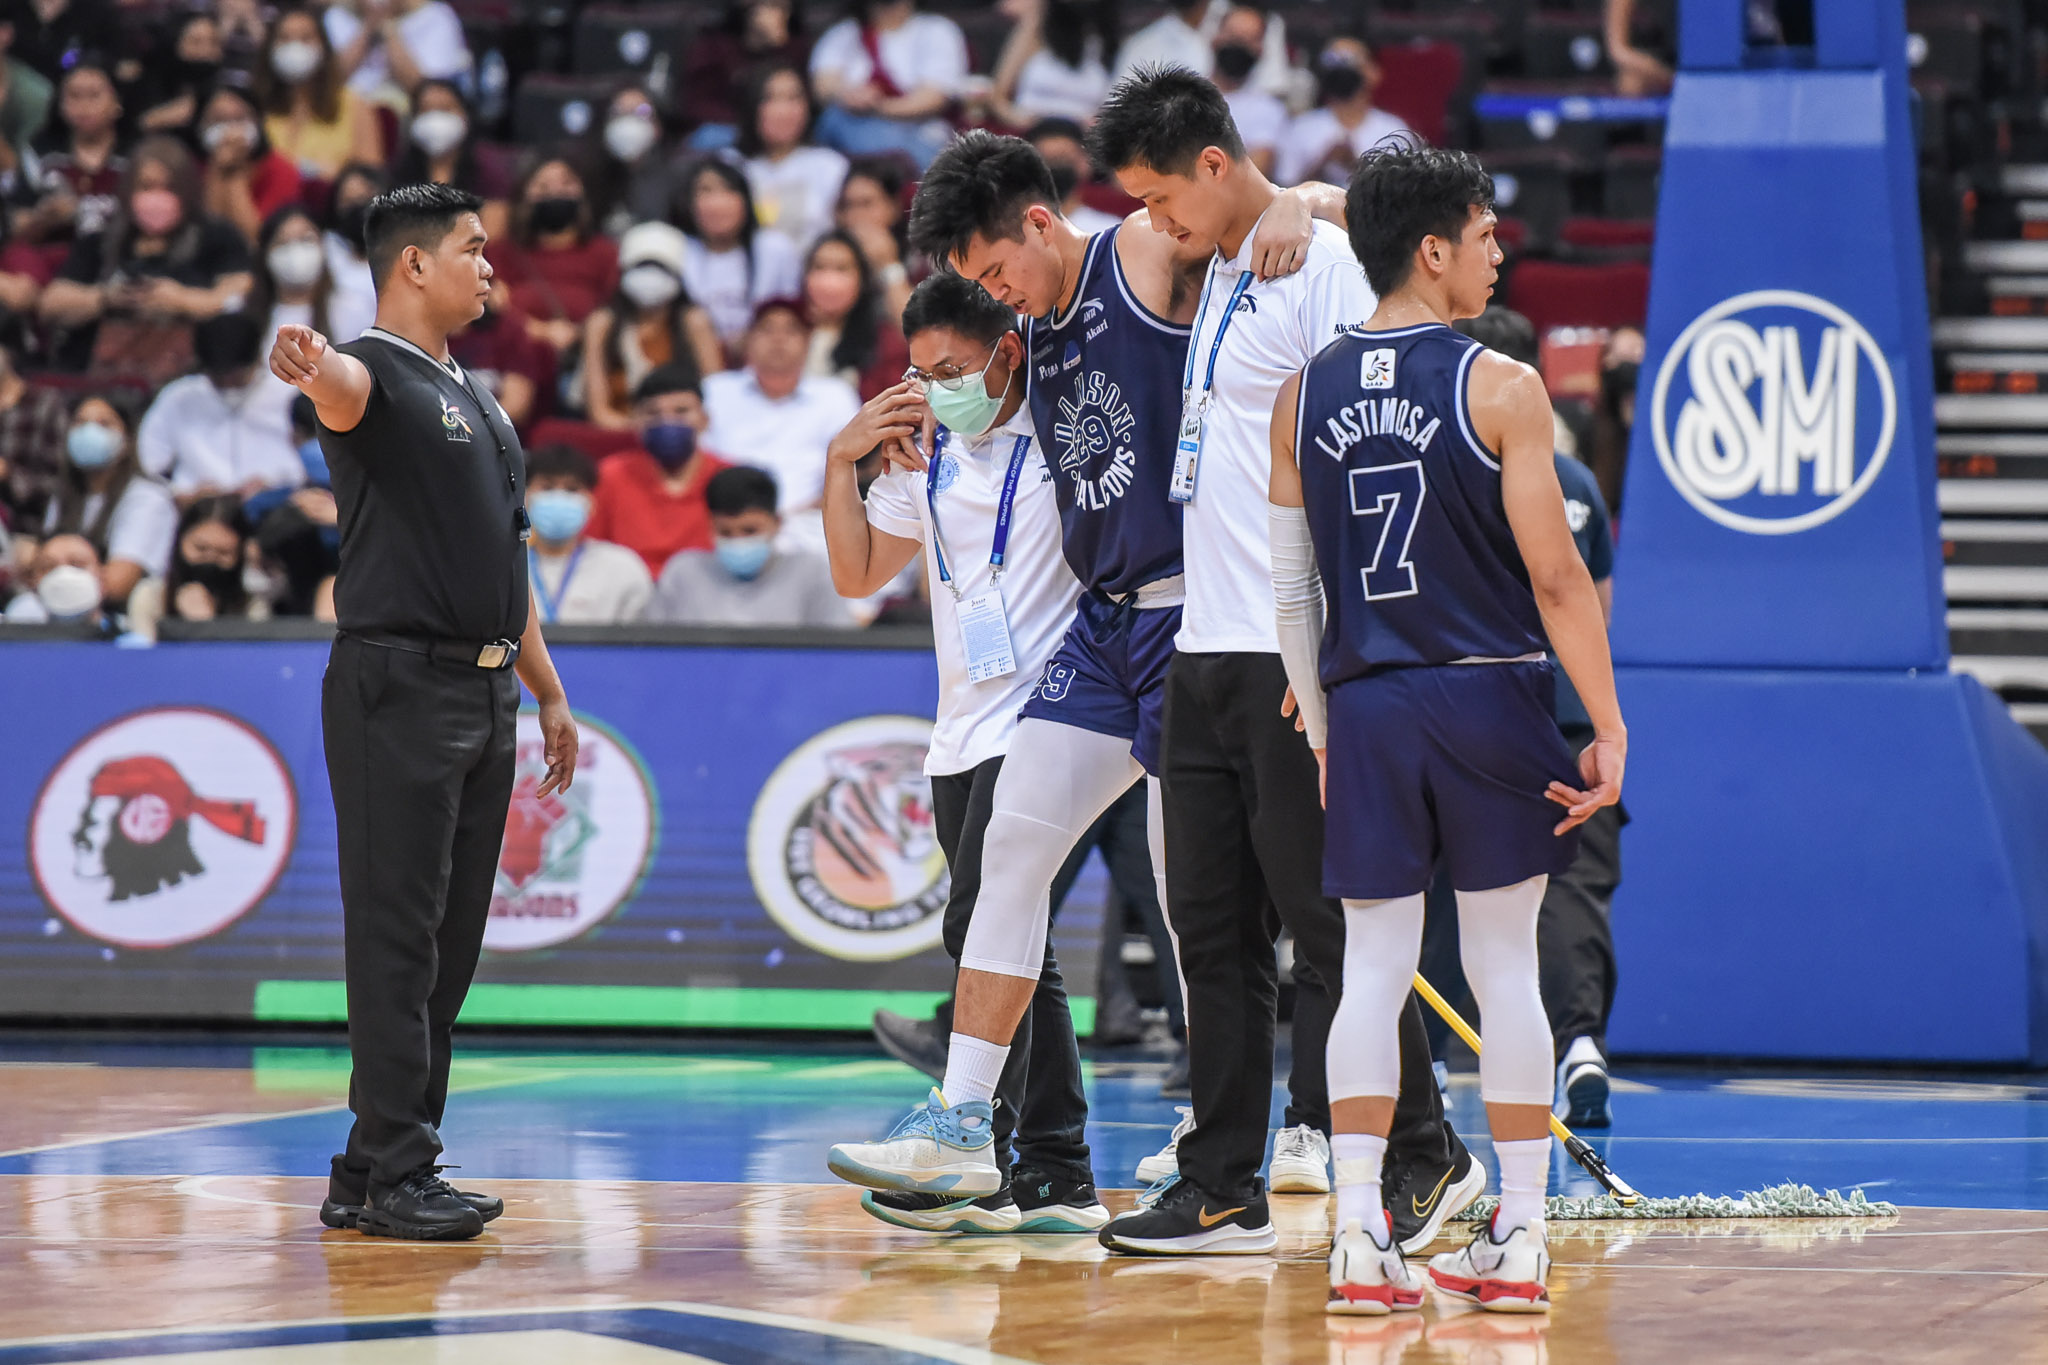 Adamson's Vince Magbuhos helped off the court after injuring his right knee. -UAAP PHOTO